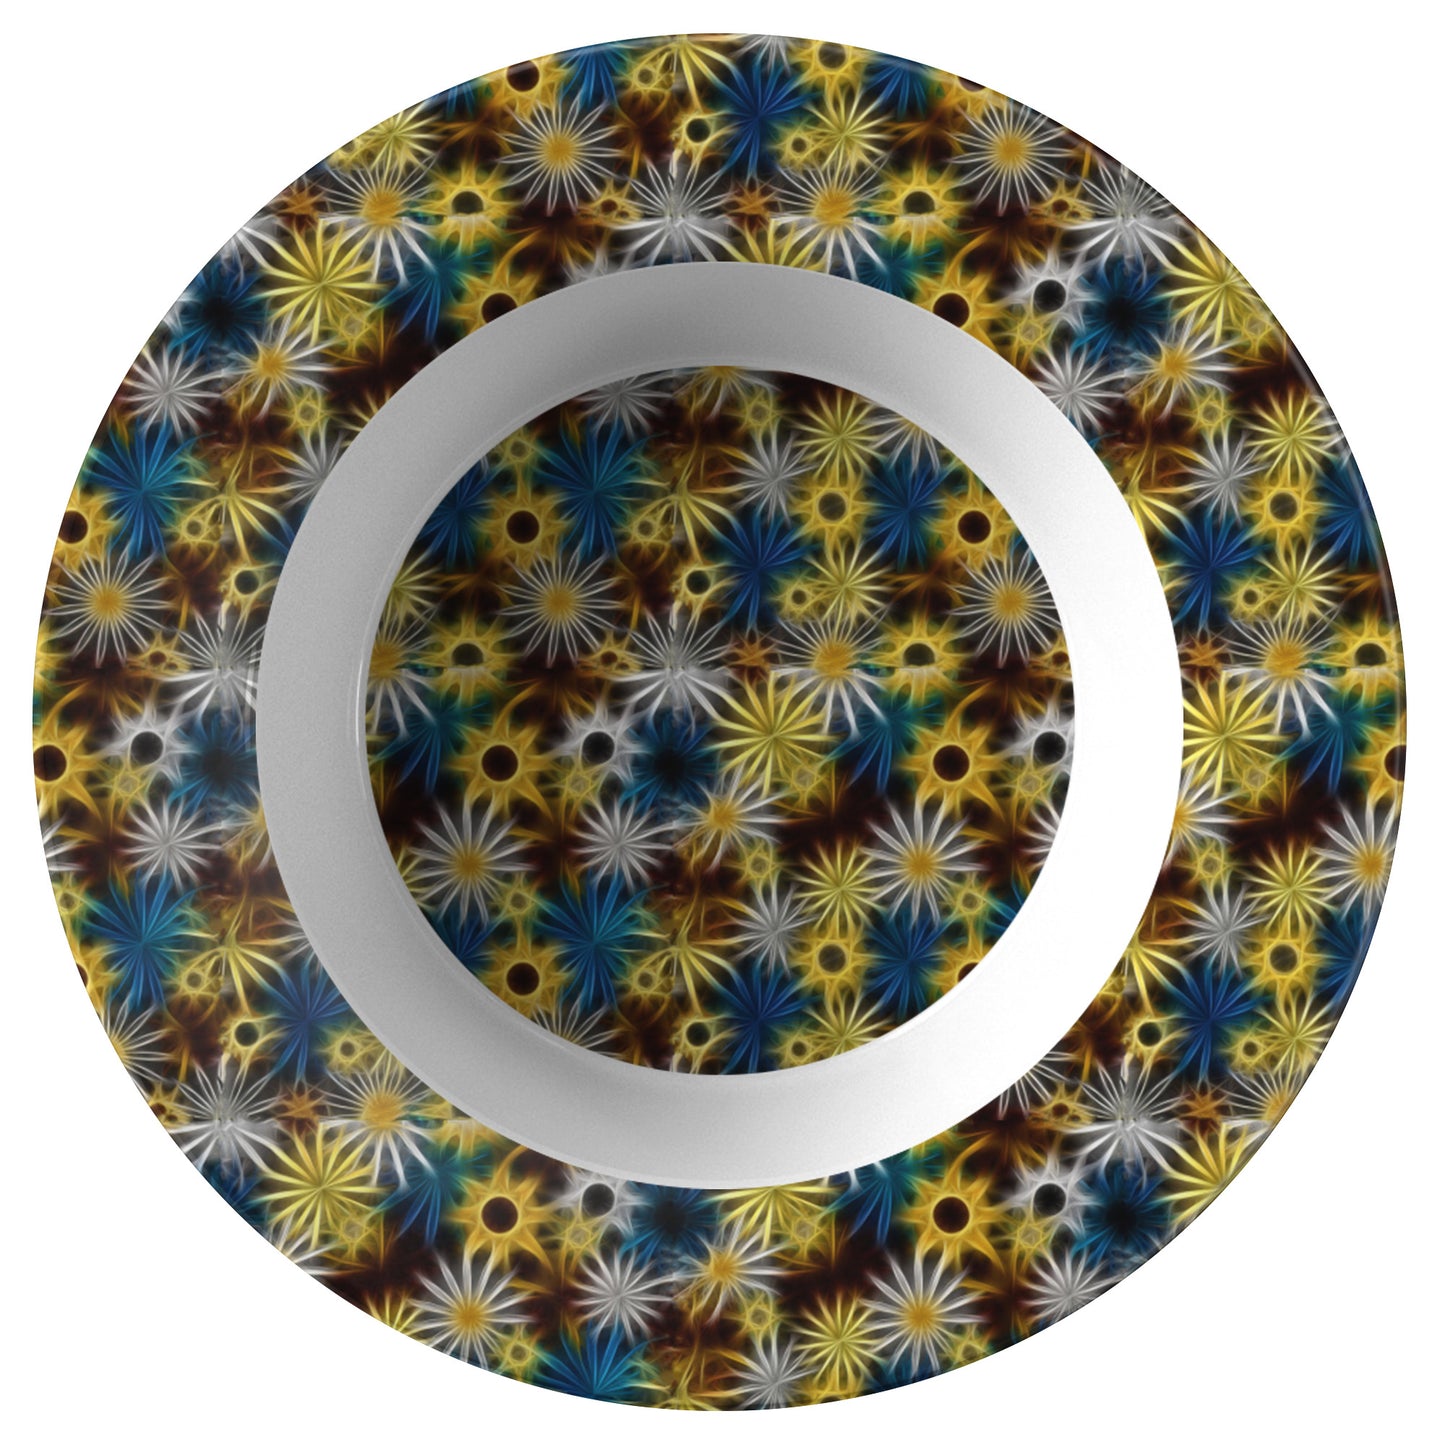 Blue and Yellow Glowing Daisies Dinner Bowl